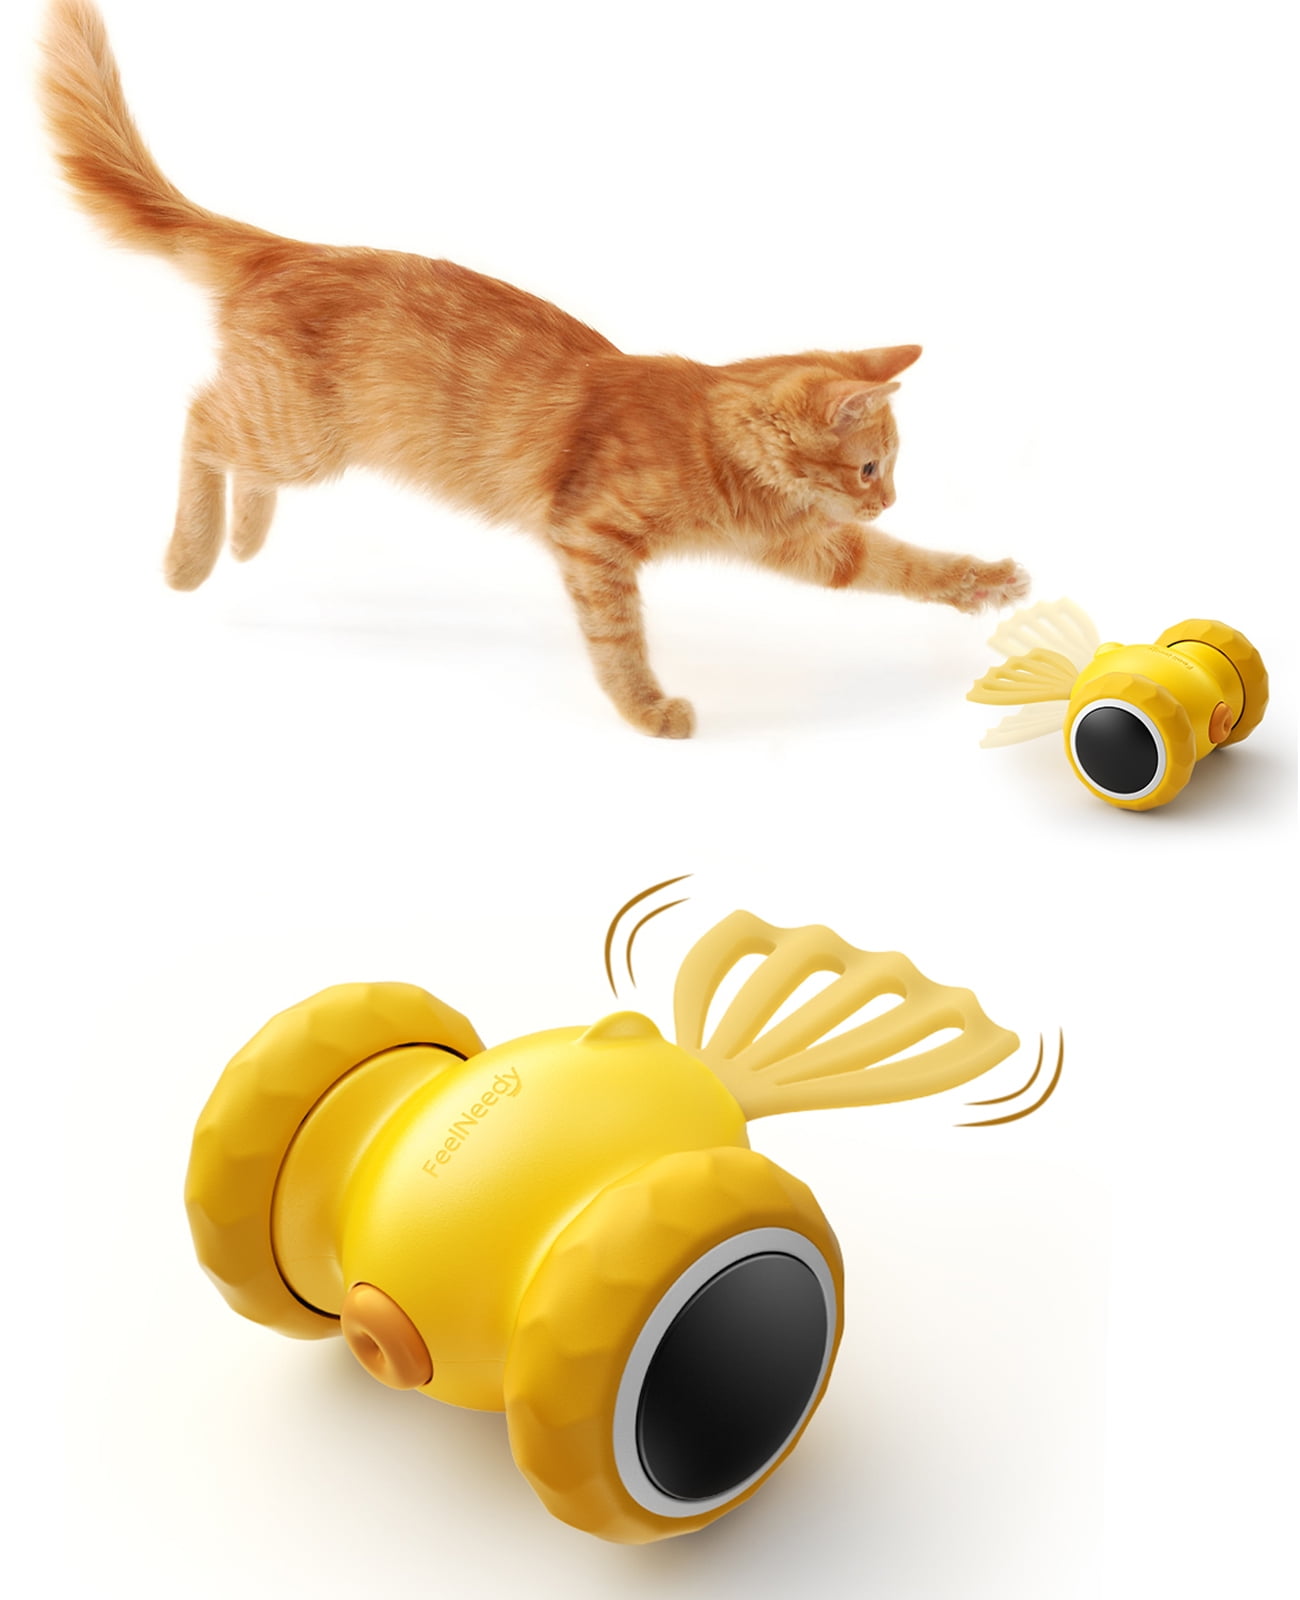 Flippity Fish Cat Toy, Interactive Cat Toy, Flips, Flops & Wiggles